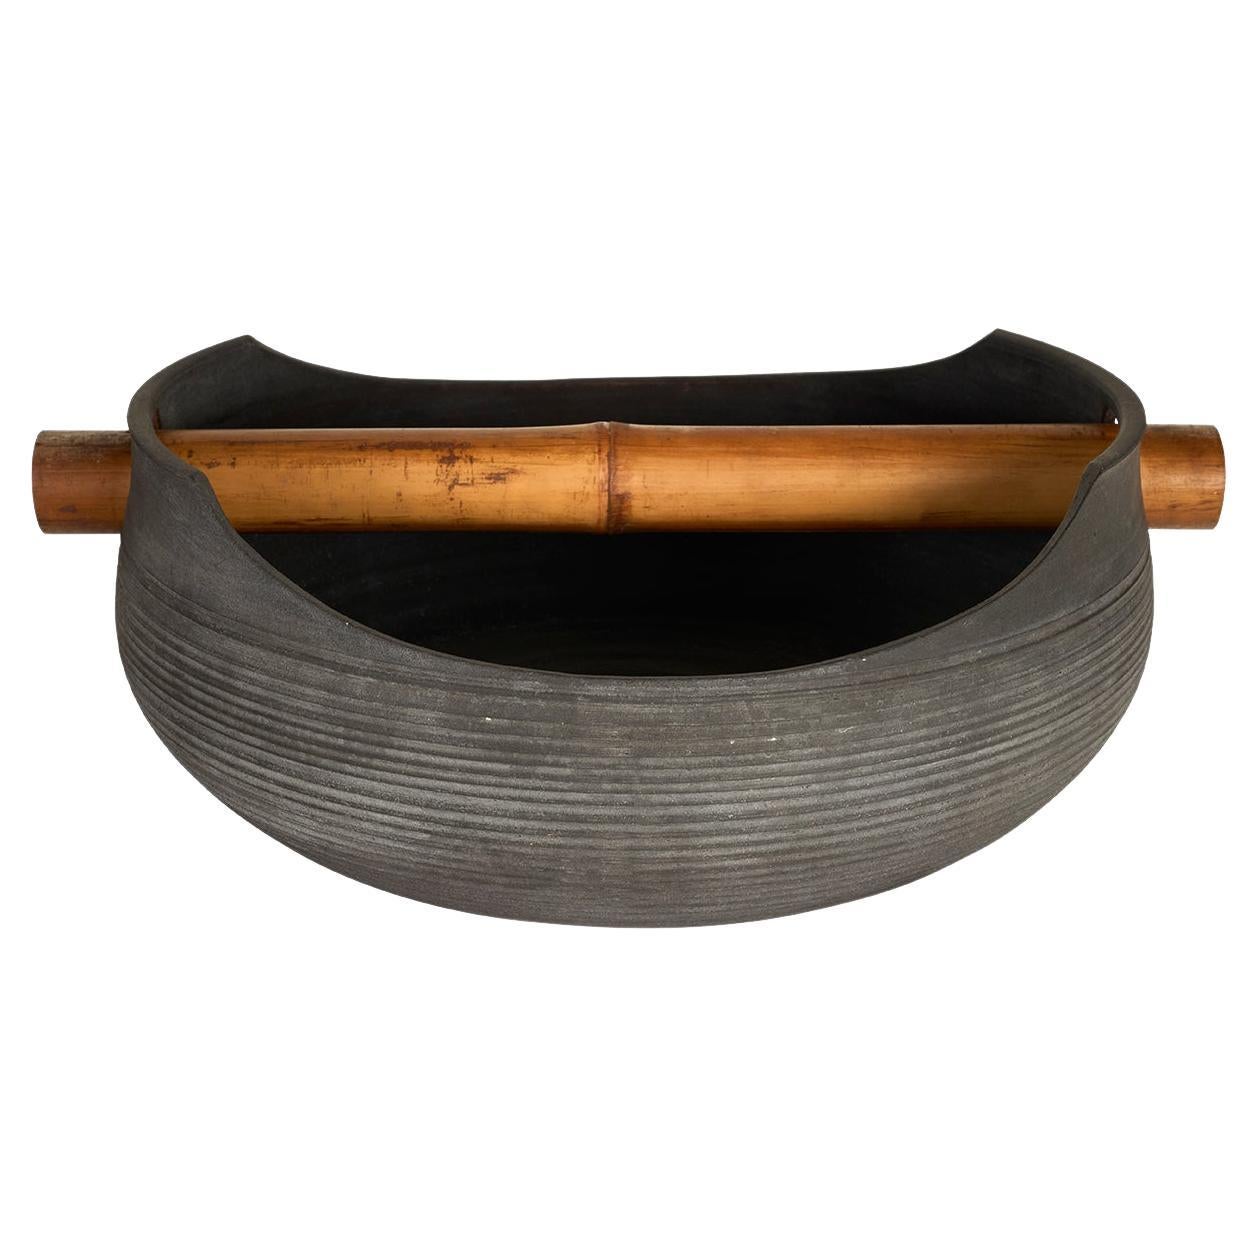 Terra Cotta Bowl with Bamboo Handle